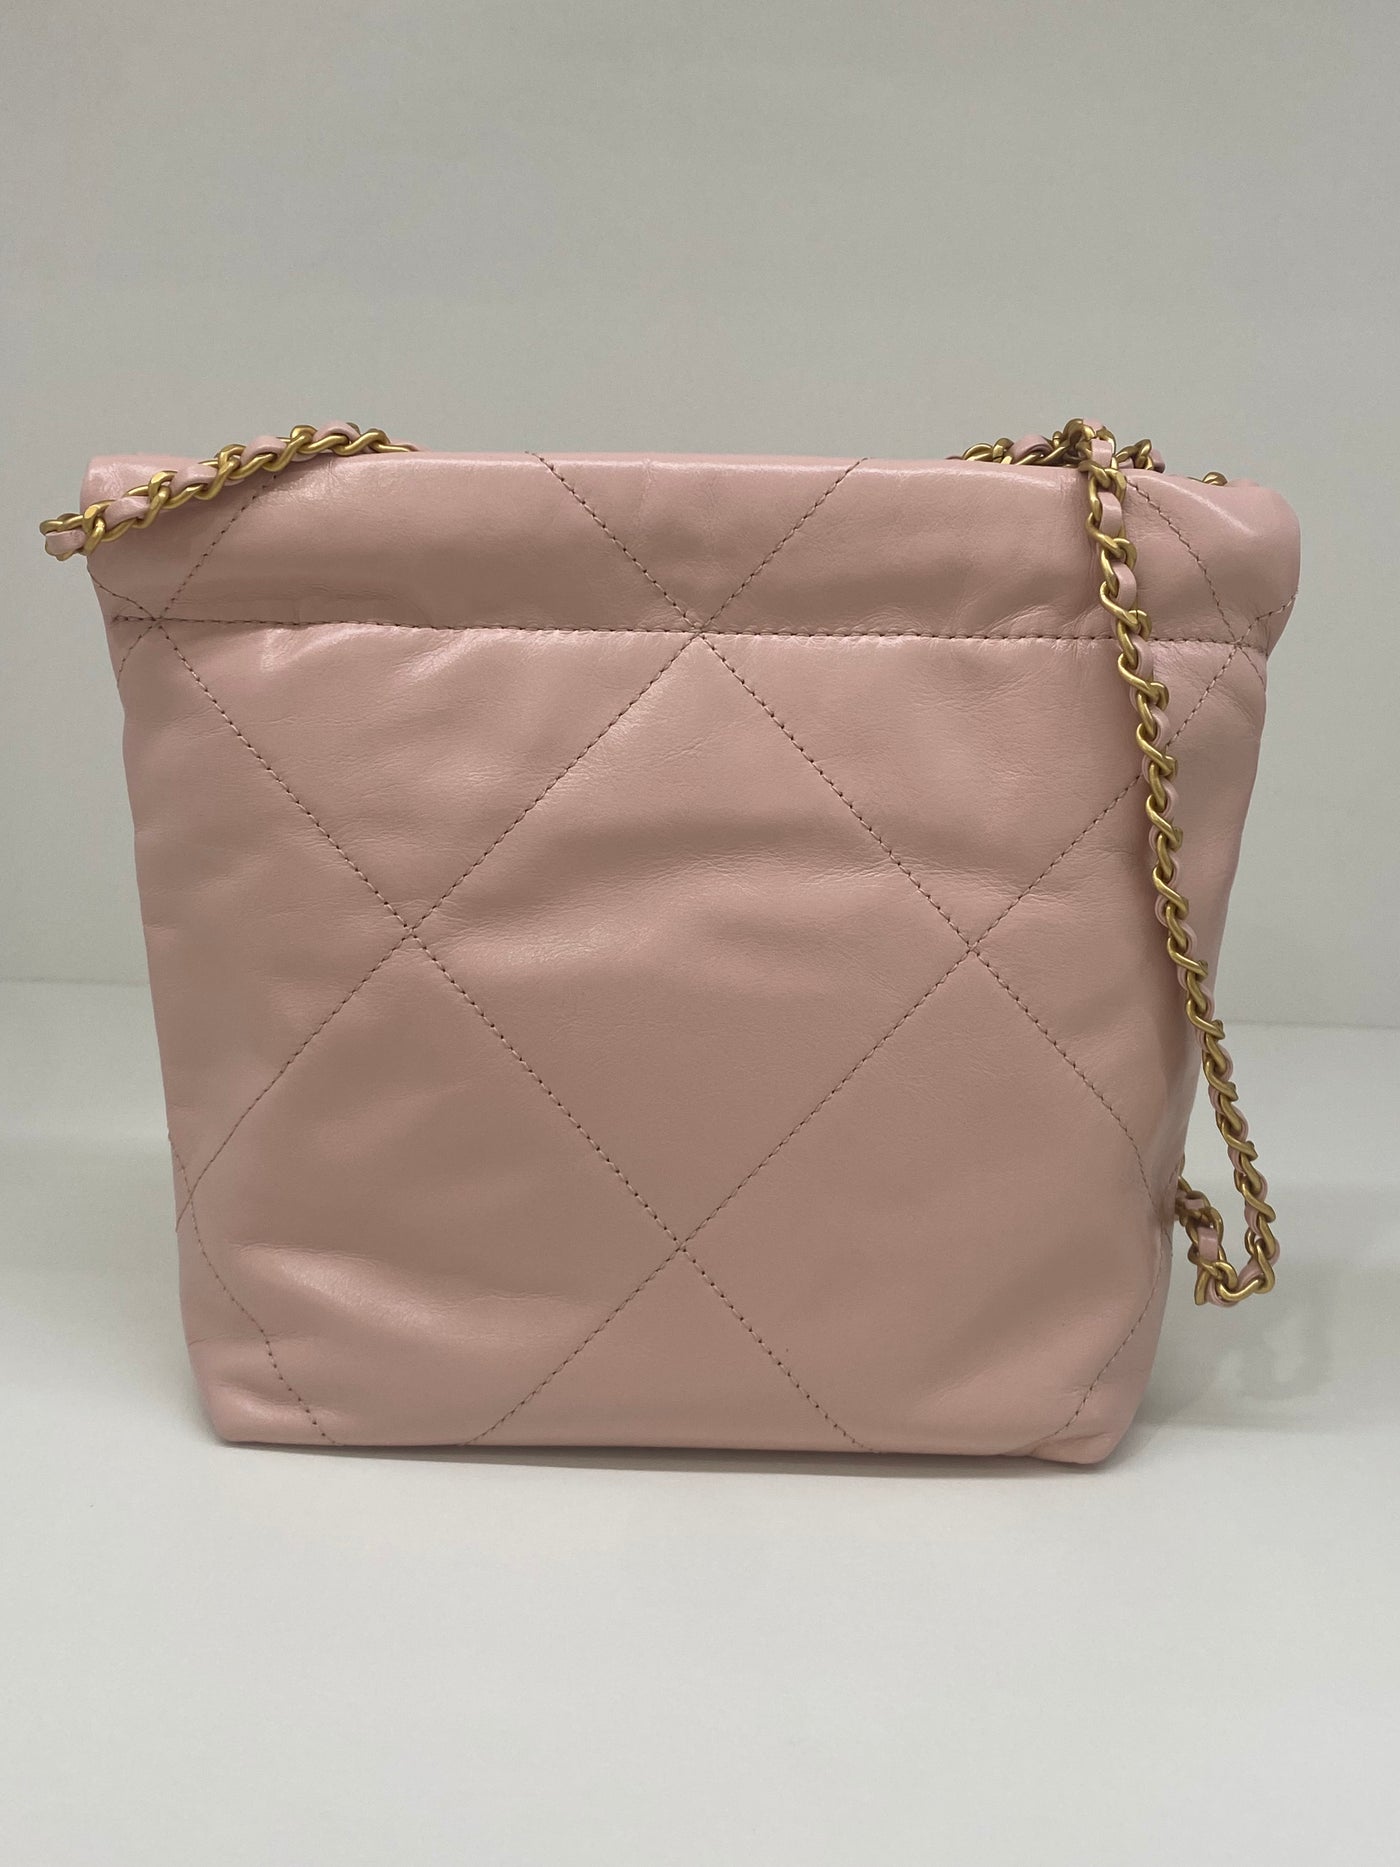 Chanel 22 Bag Mini - Pink GHW – PH Luxury Consignment